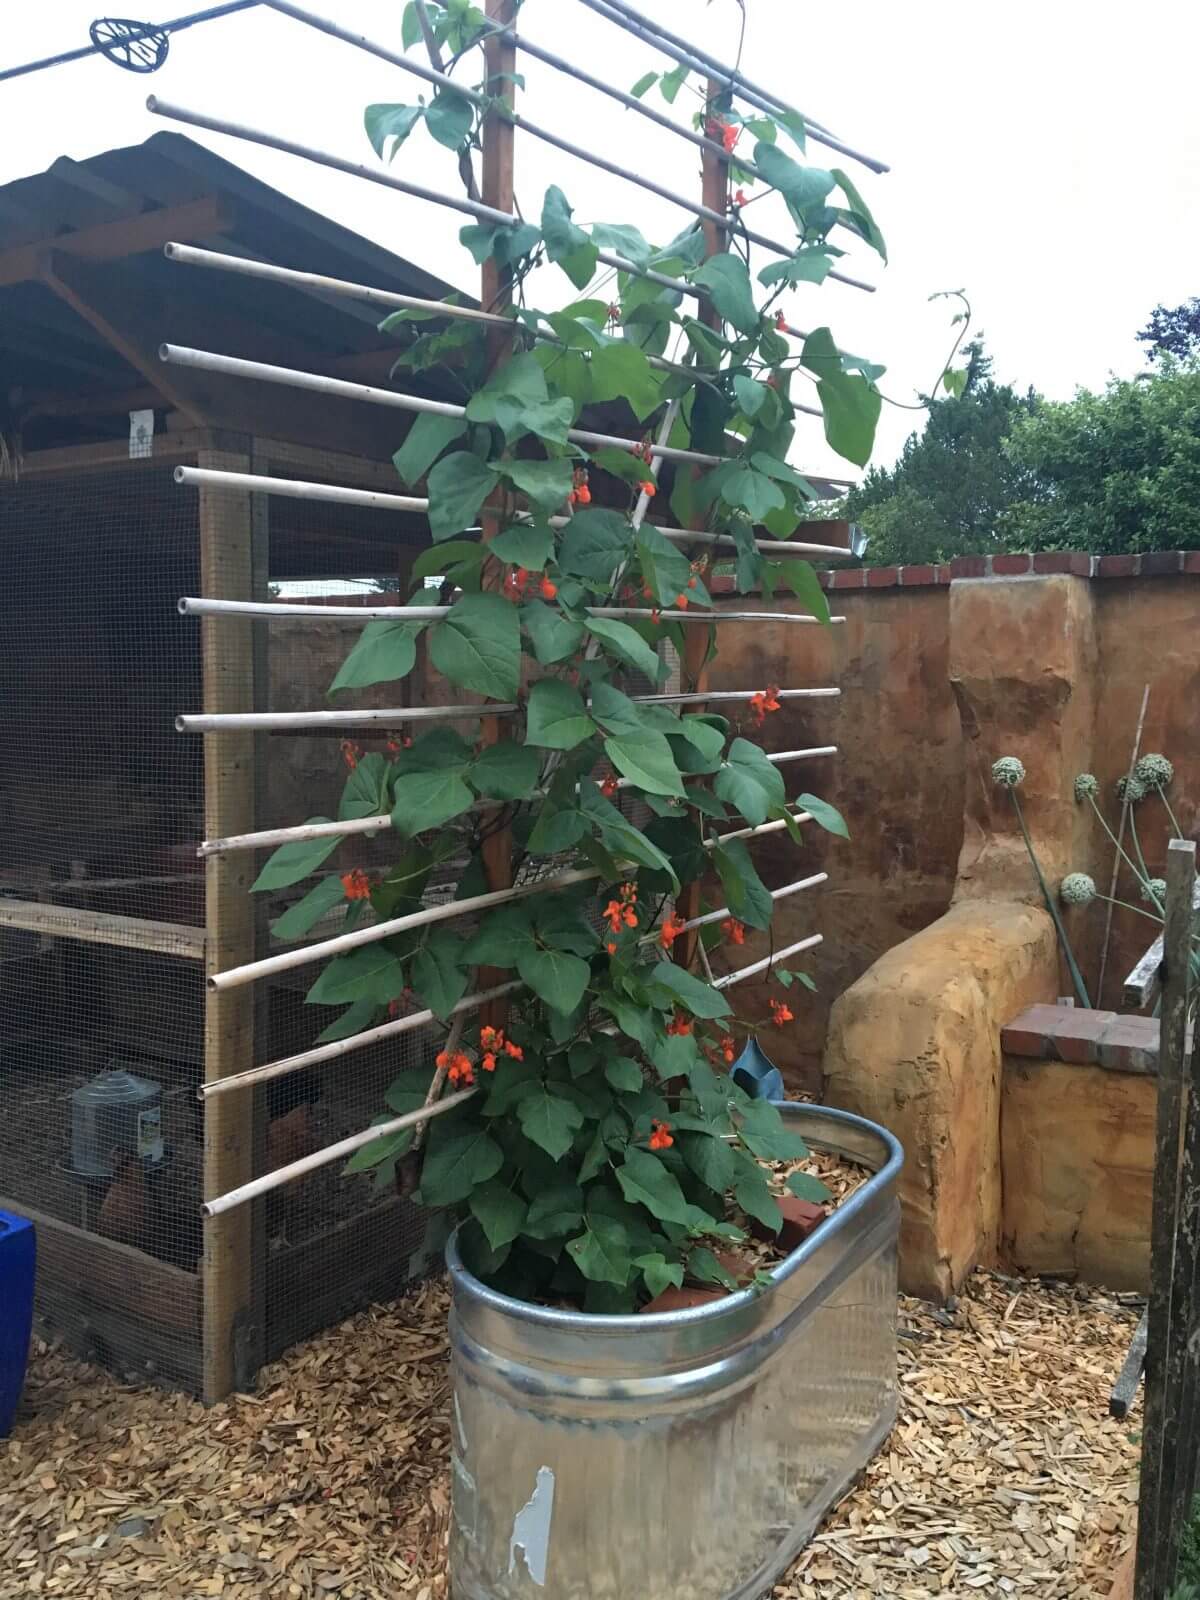 One of our oval galvanized troughs planted with scarlet runner beans.